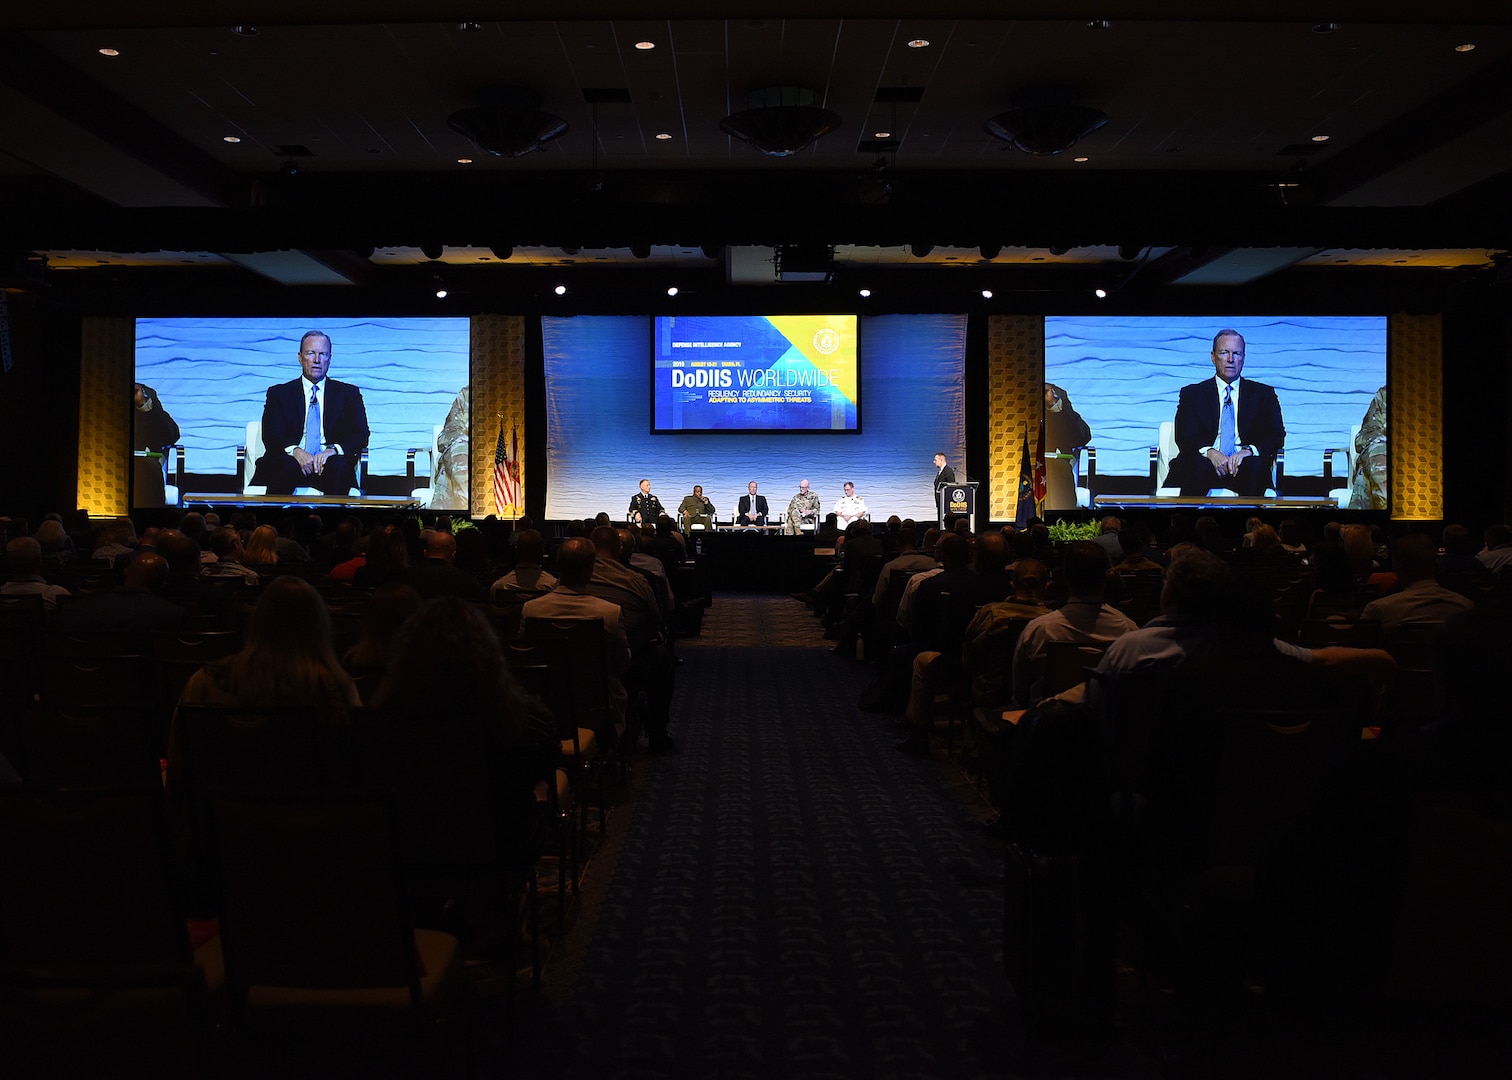 Directors of intelligence from five U.S. military organizations participate in a panel discussion on how artificial intelligence, modernization and information sharing impact military readiness during the Defense Intelligence Agency DoDIIS Worldwide Conference, Aug. 21, 2019, at the Tampa Convention Center, in Florida.